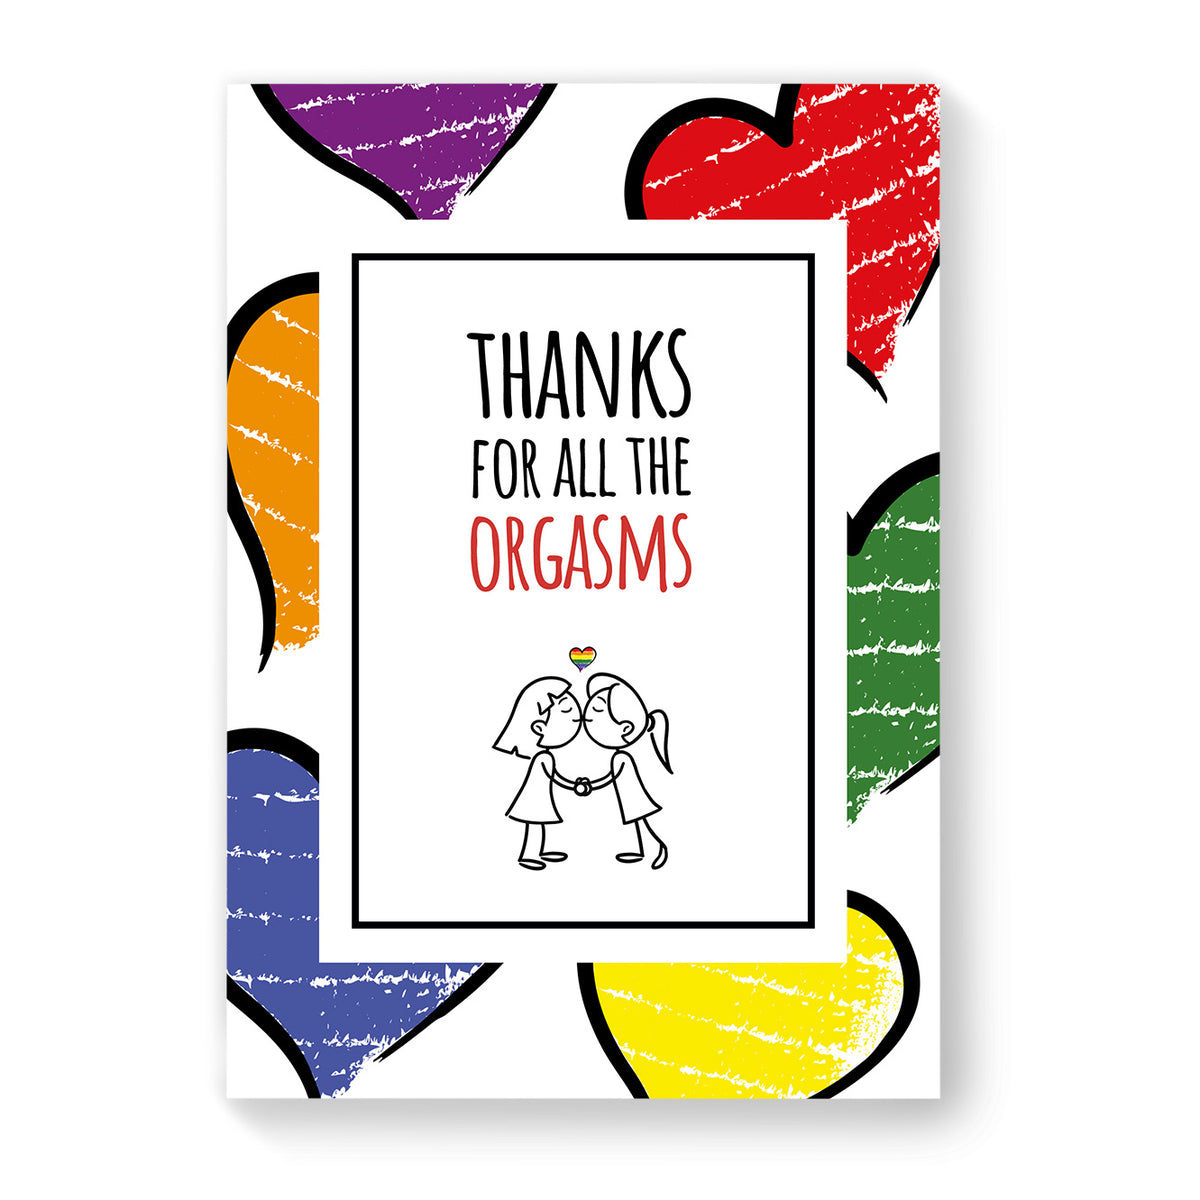 Thanks for all the Orgasms - Lesbian Gay Couple Card - Large Heart | Gift